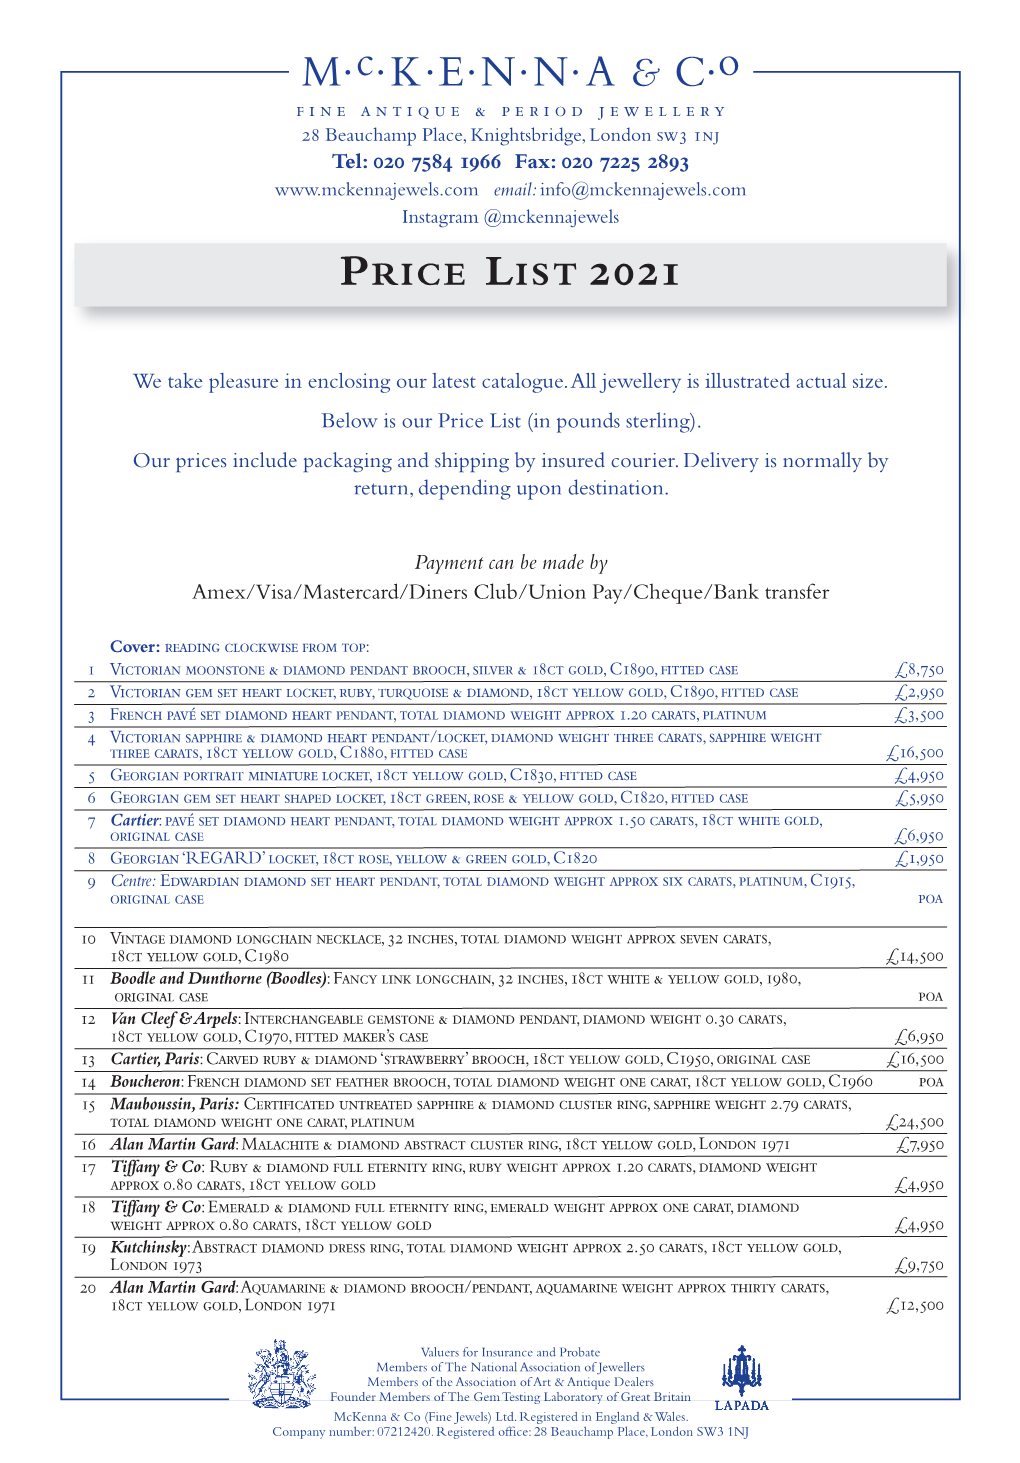 Price List 2021.Qxp Layout 1 10/11/2020 07:26 Page 1